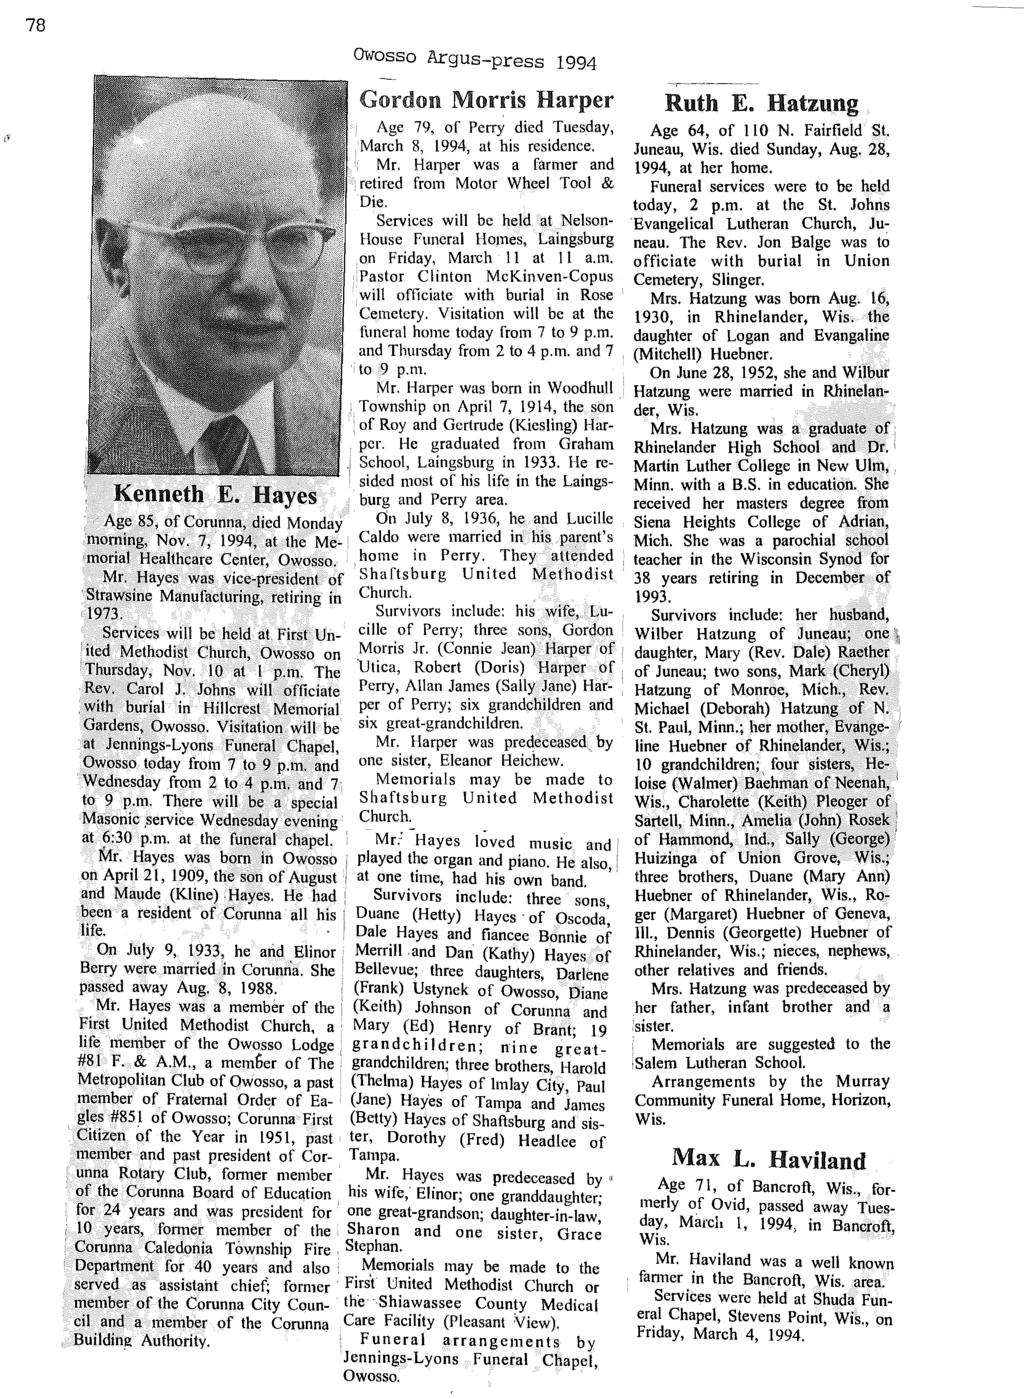 78 Age 85, of Corunna, died Monday morning, Nov. 7, 1994; at the Me 'morial Healthcare Center, Owosso. Mr. Hayes was vice-president of 'Strawsine ManUfacturing, retiring in 1973.